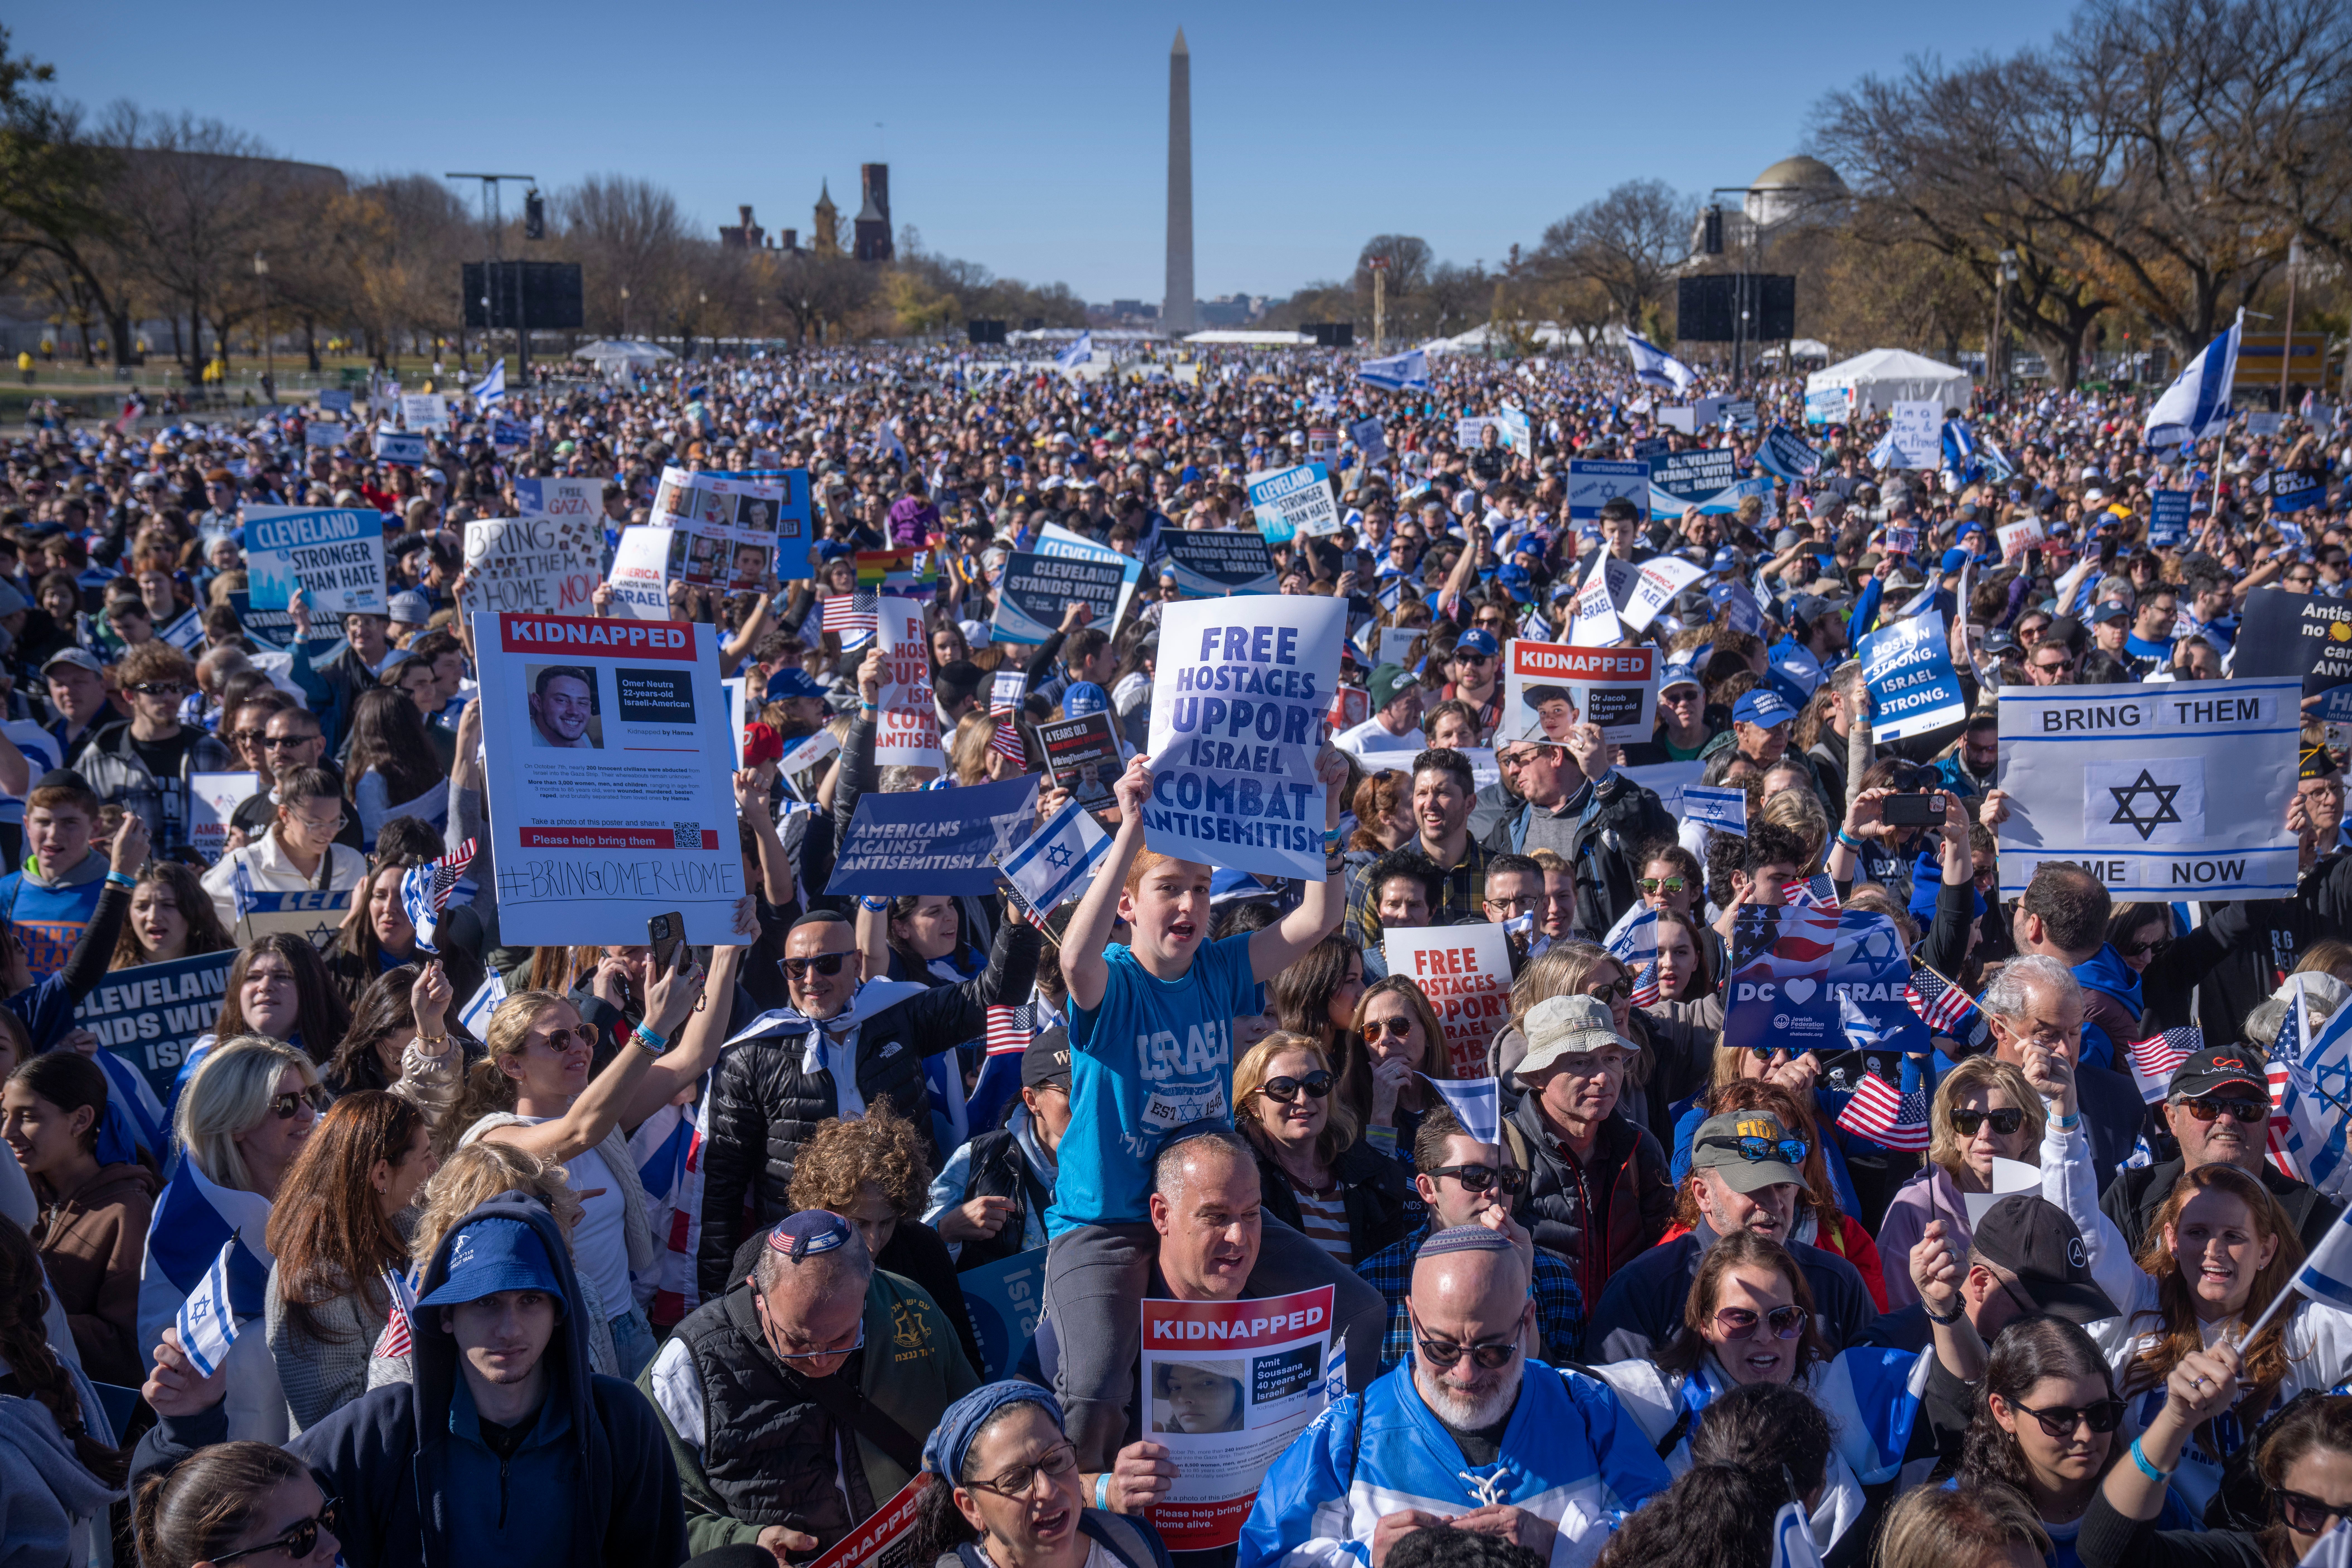 Thousands of people joined a March for Israel in Washington DC on 14 November.